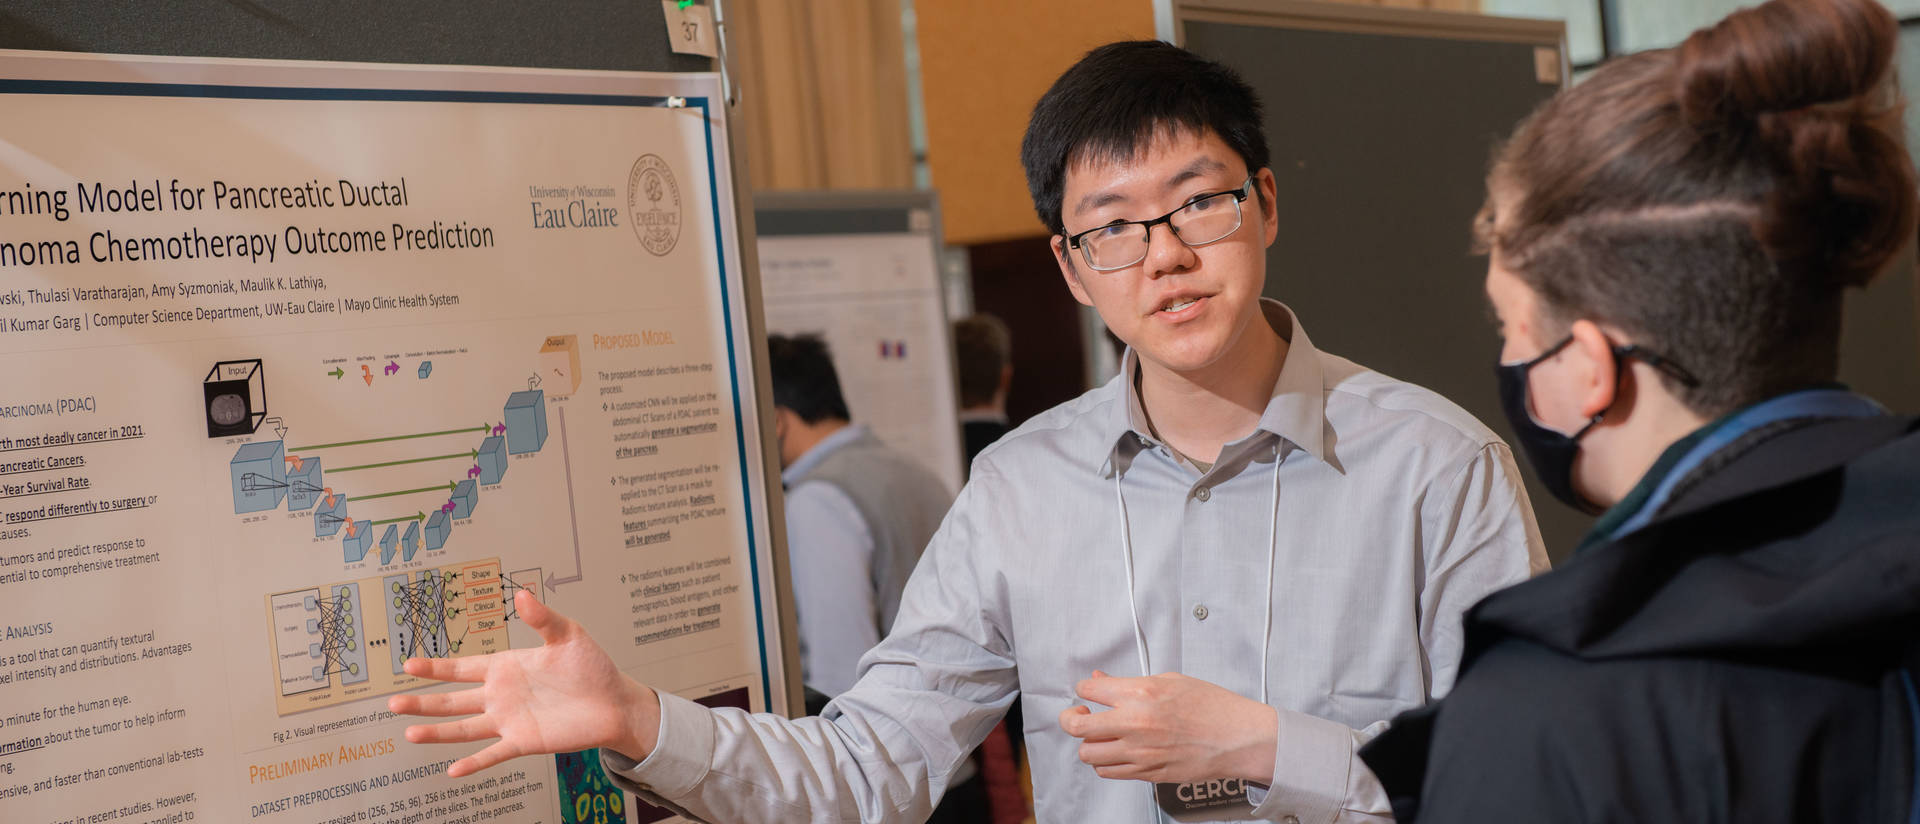 Student presents their research poster at the Celebration of Excellence in Research and Creative Activity.